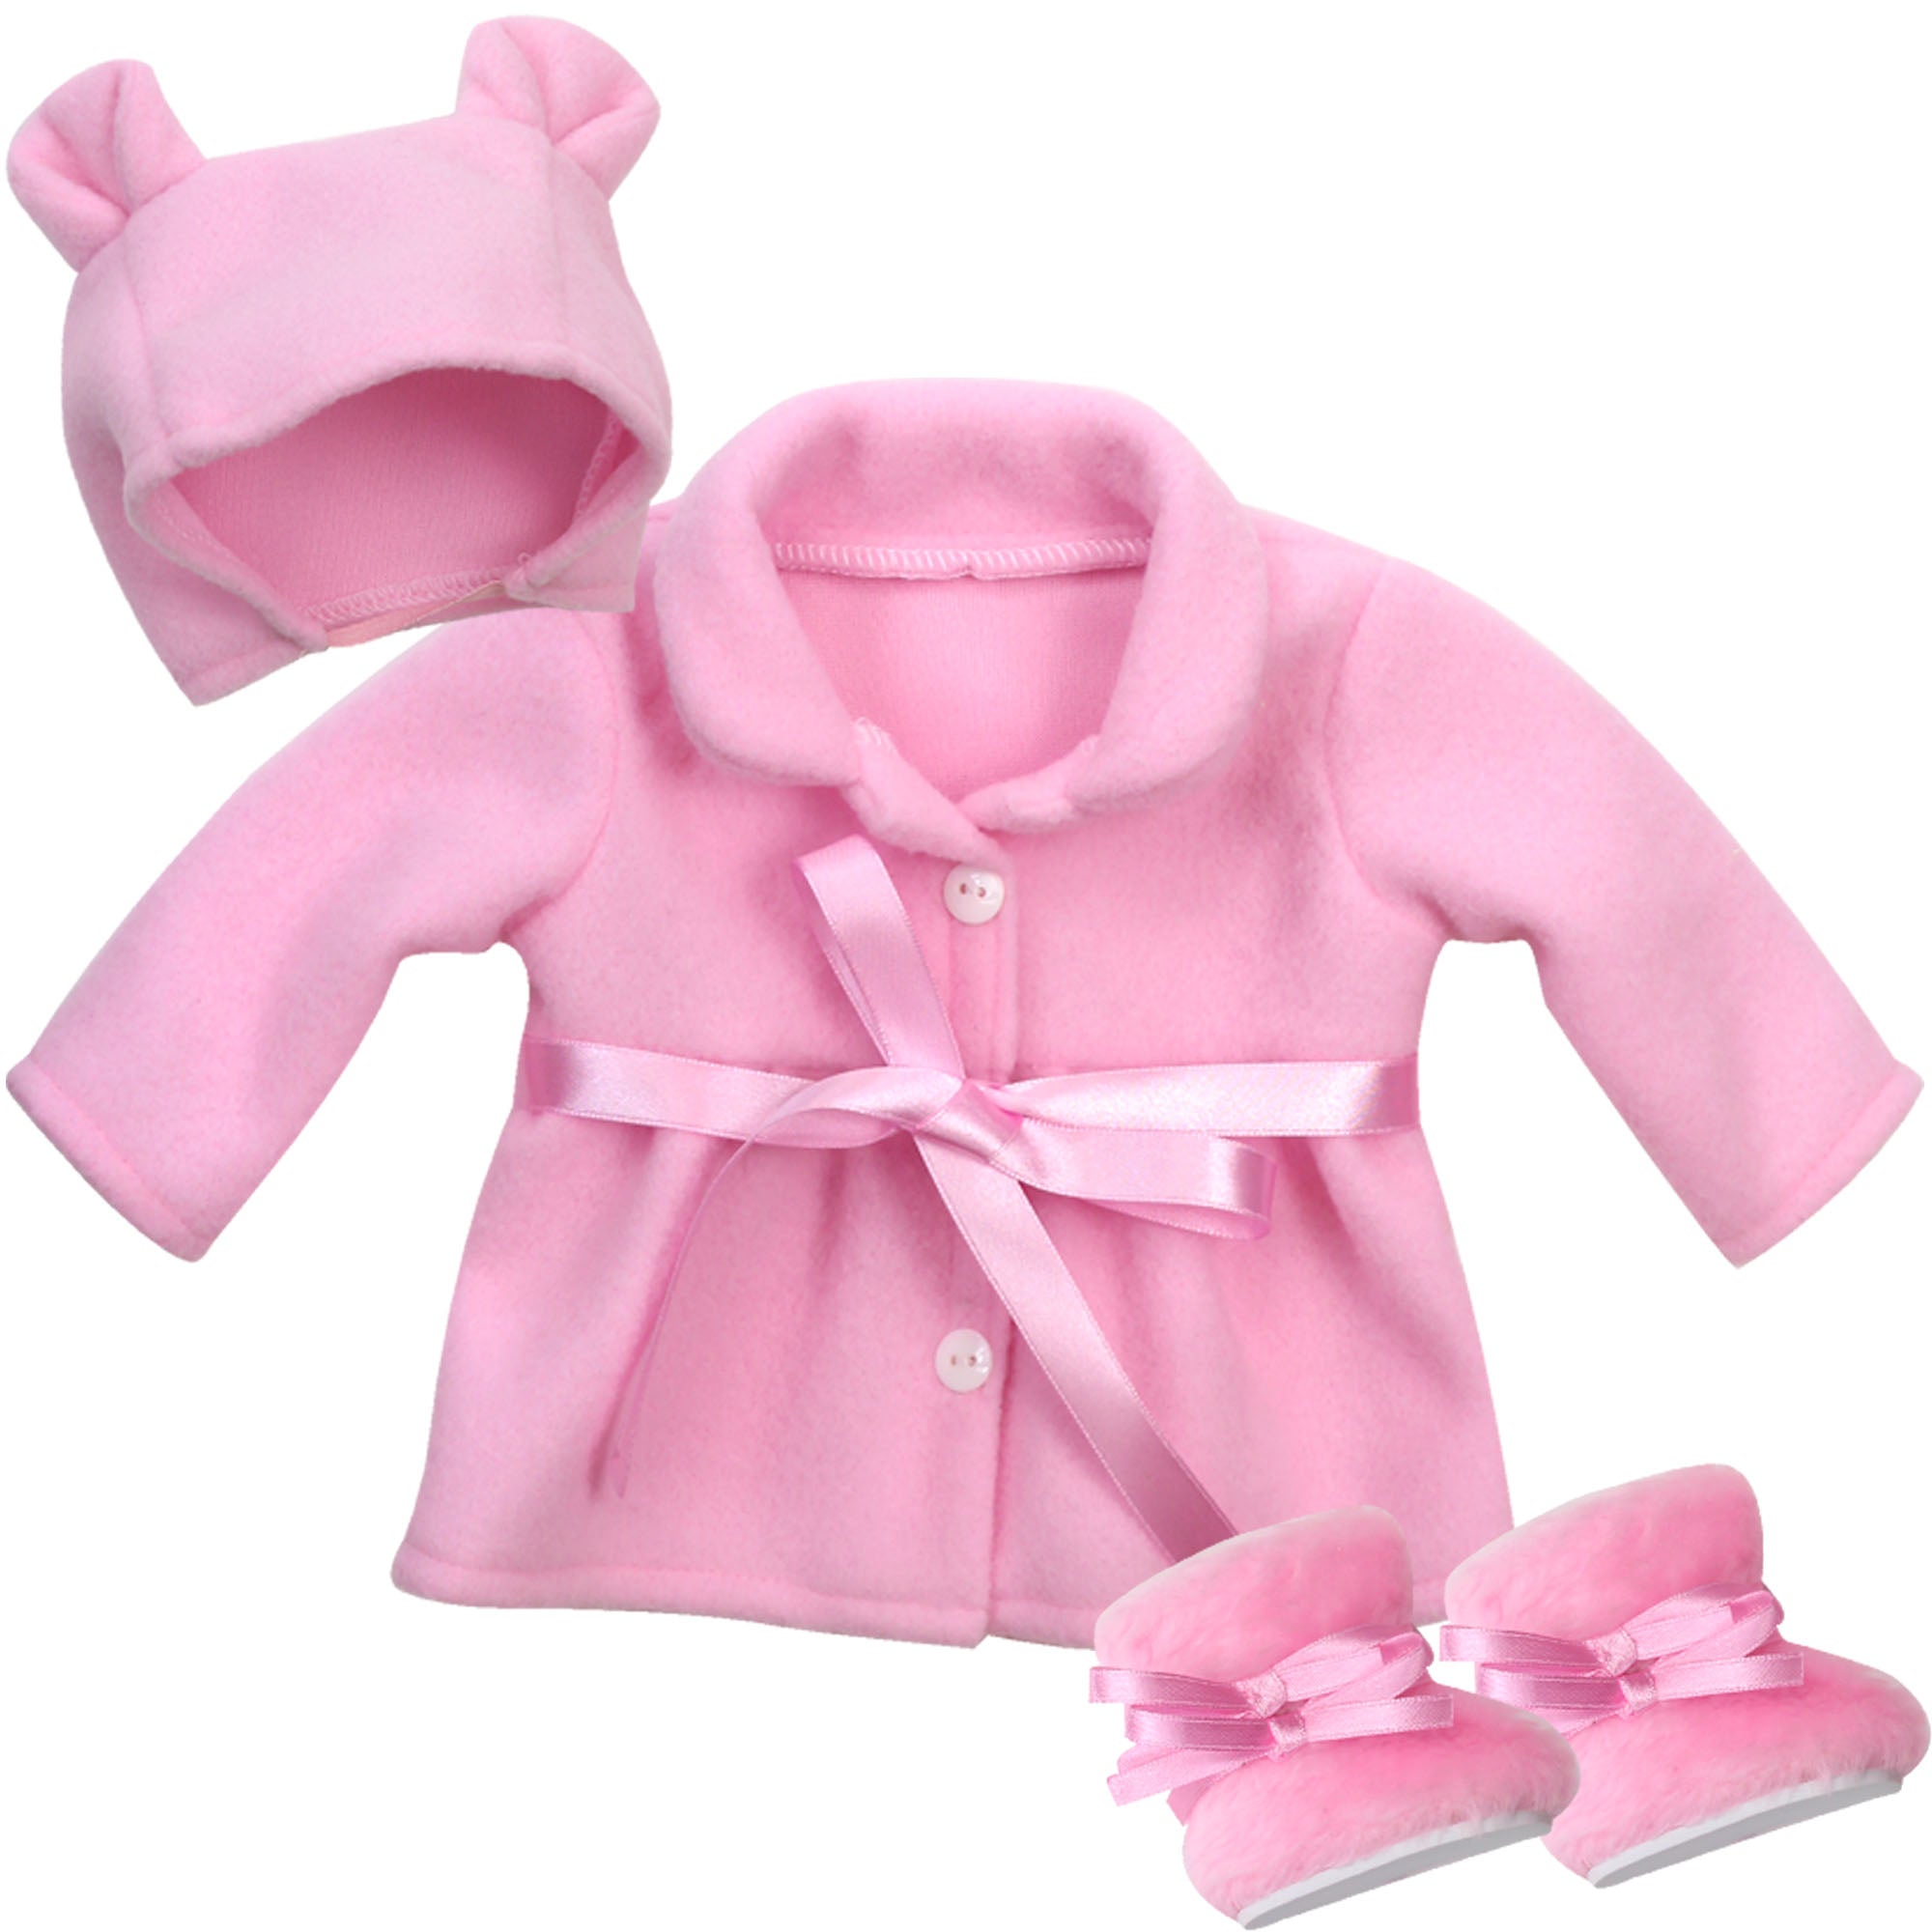 Sophia's Winter Coat, Hat and Boots Set for 15'' Dolls, Light Pink